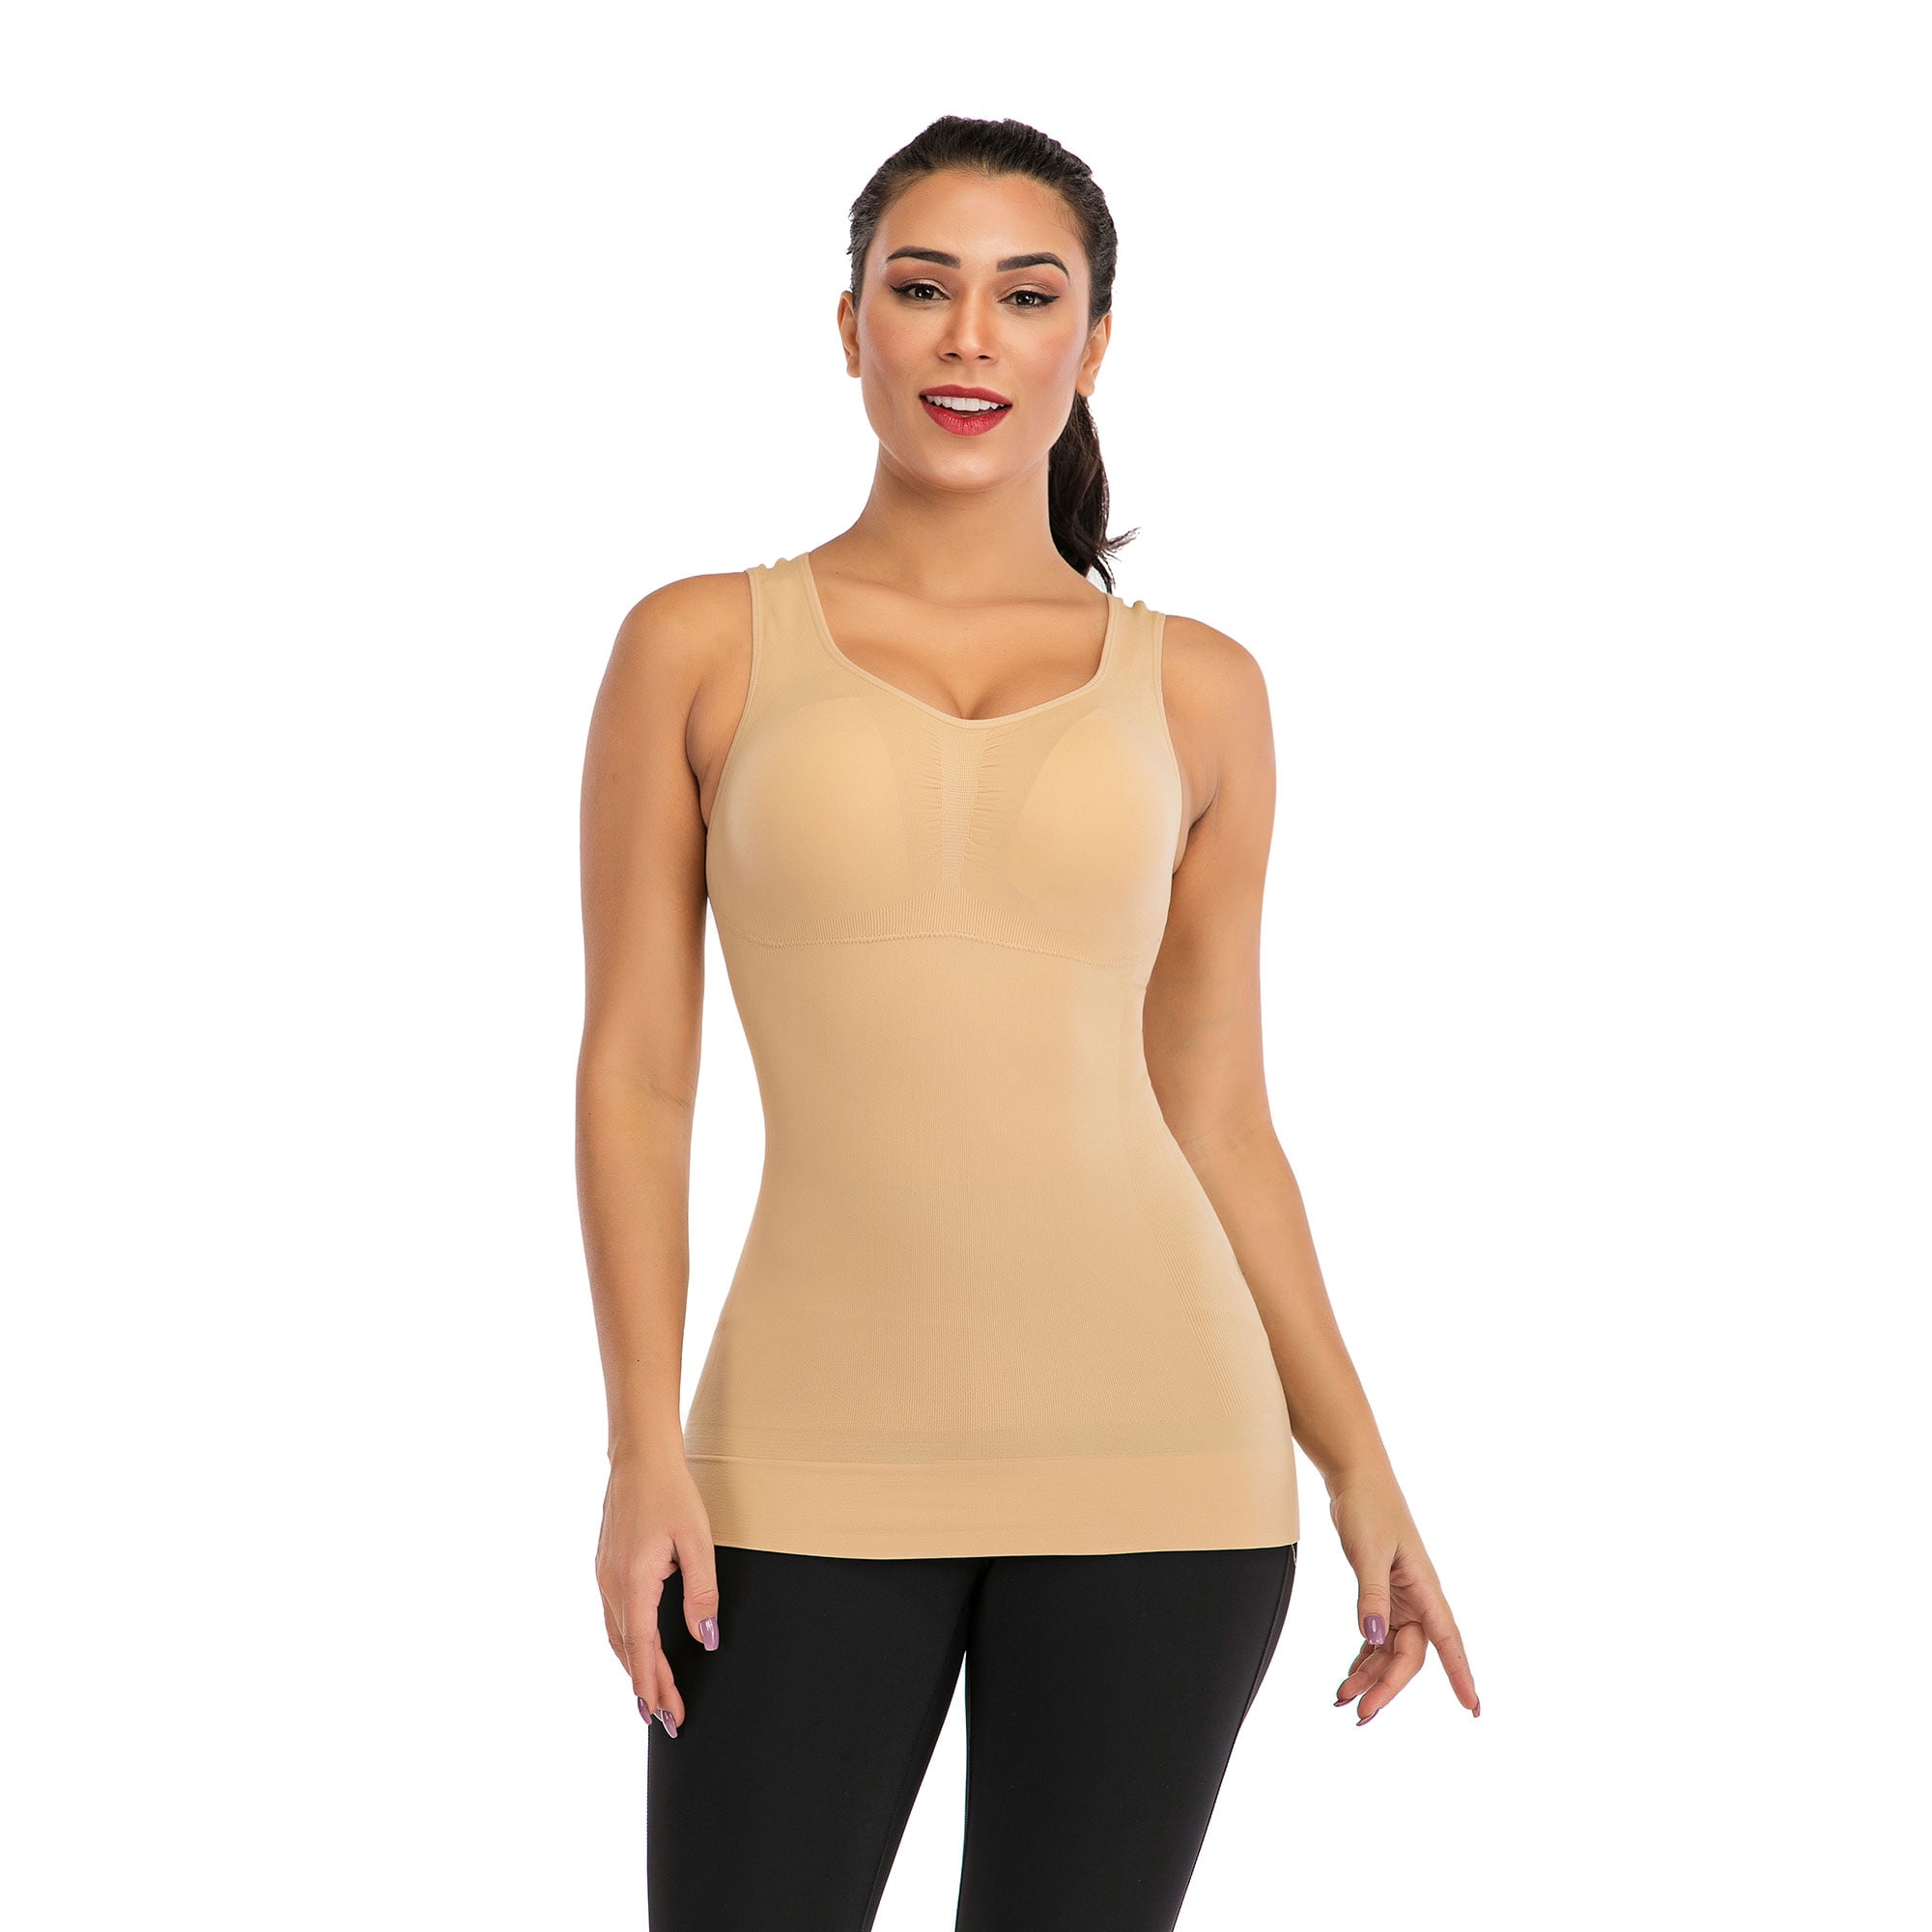 Solid Shaping Tank Tops Tummy Control Slimmer Sleeveless Top